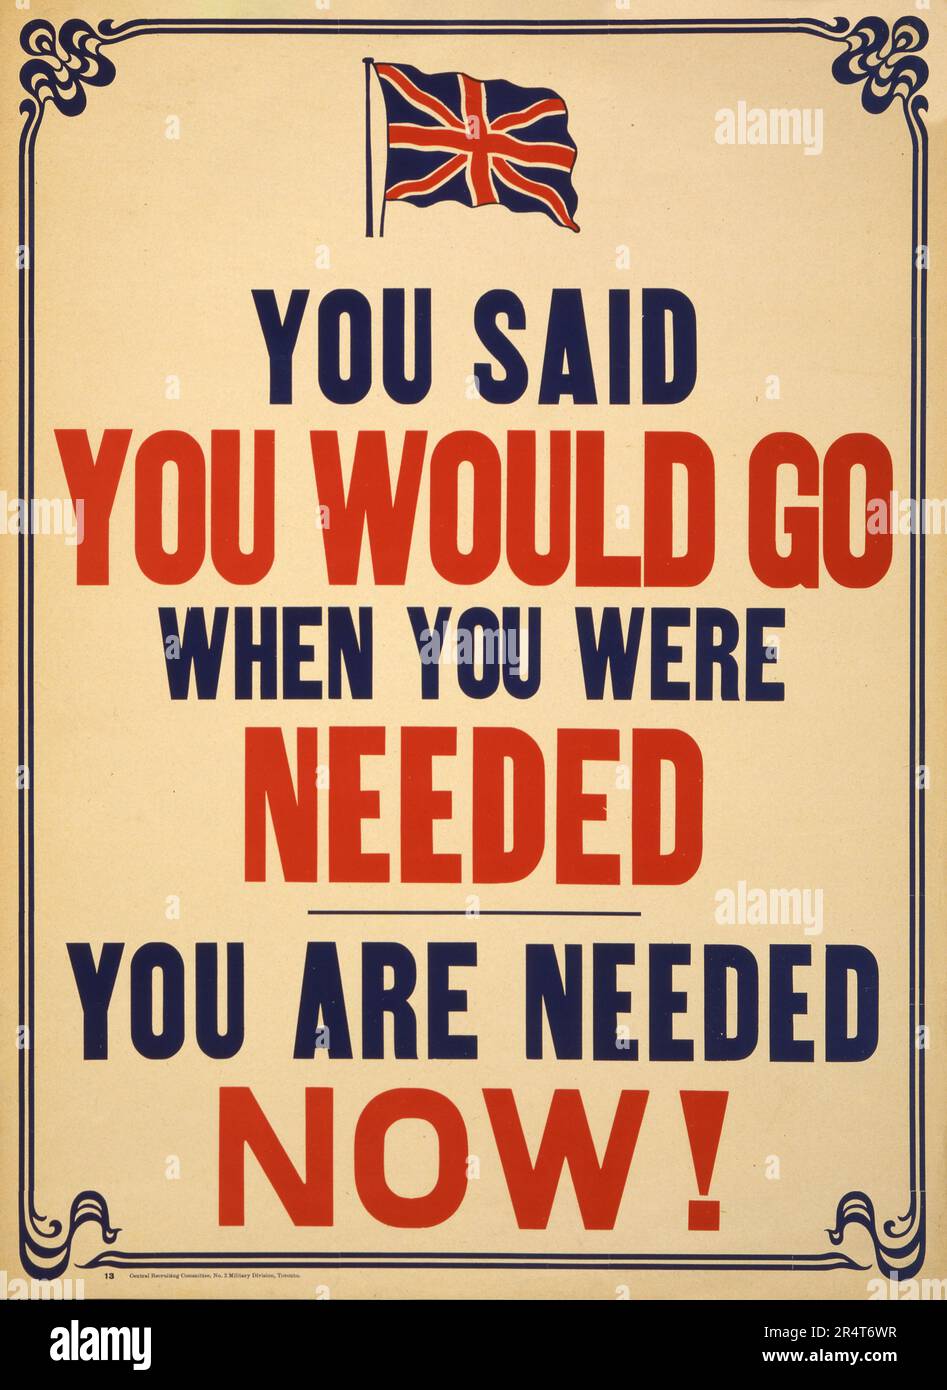 Canadian World War II propaganda - You said you would go when you were needed. You are needed NOW! - Toronto - Central Recruiting Committee, No. 2 Military Division - British flag Stock Photo